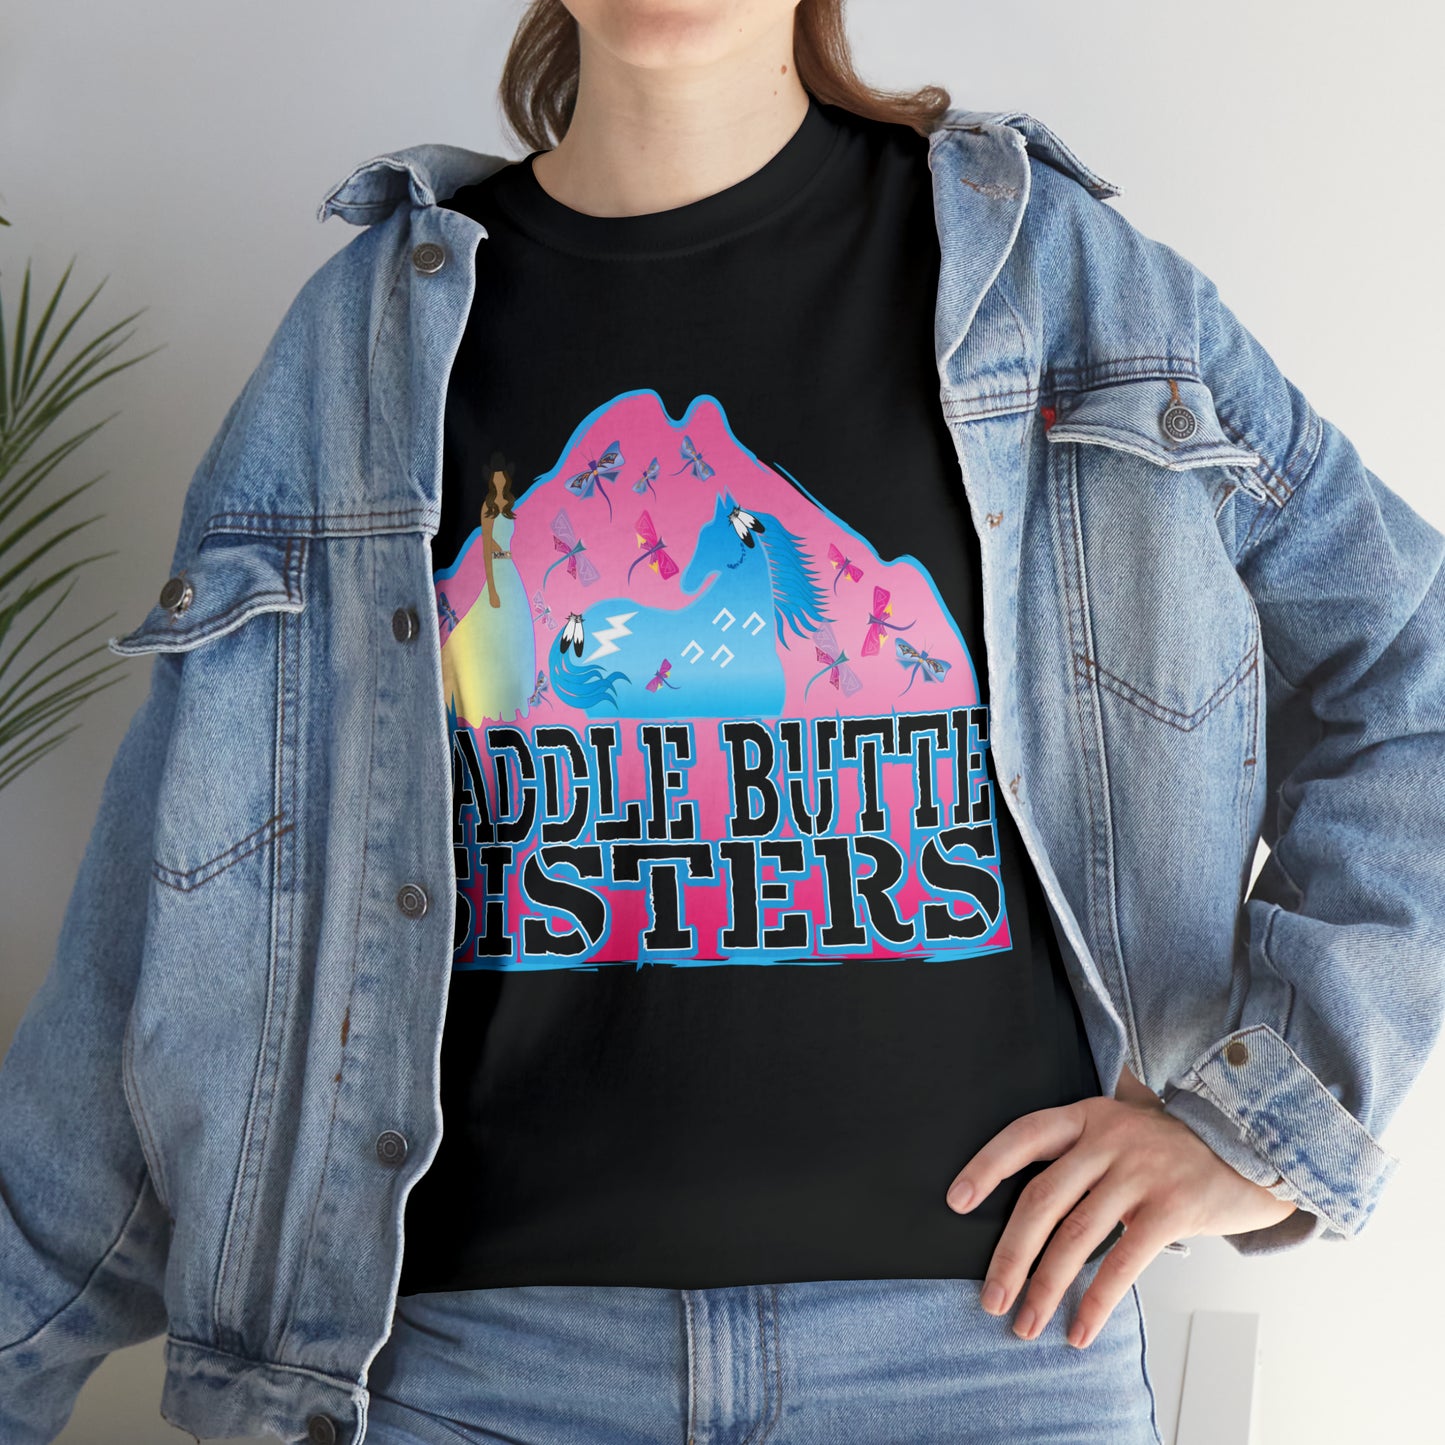 Saddle Butte Sisters Unisex Heavy Cotton Tee